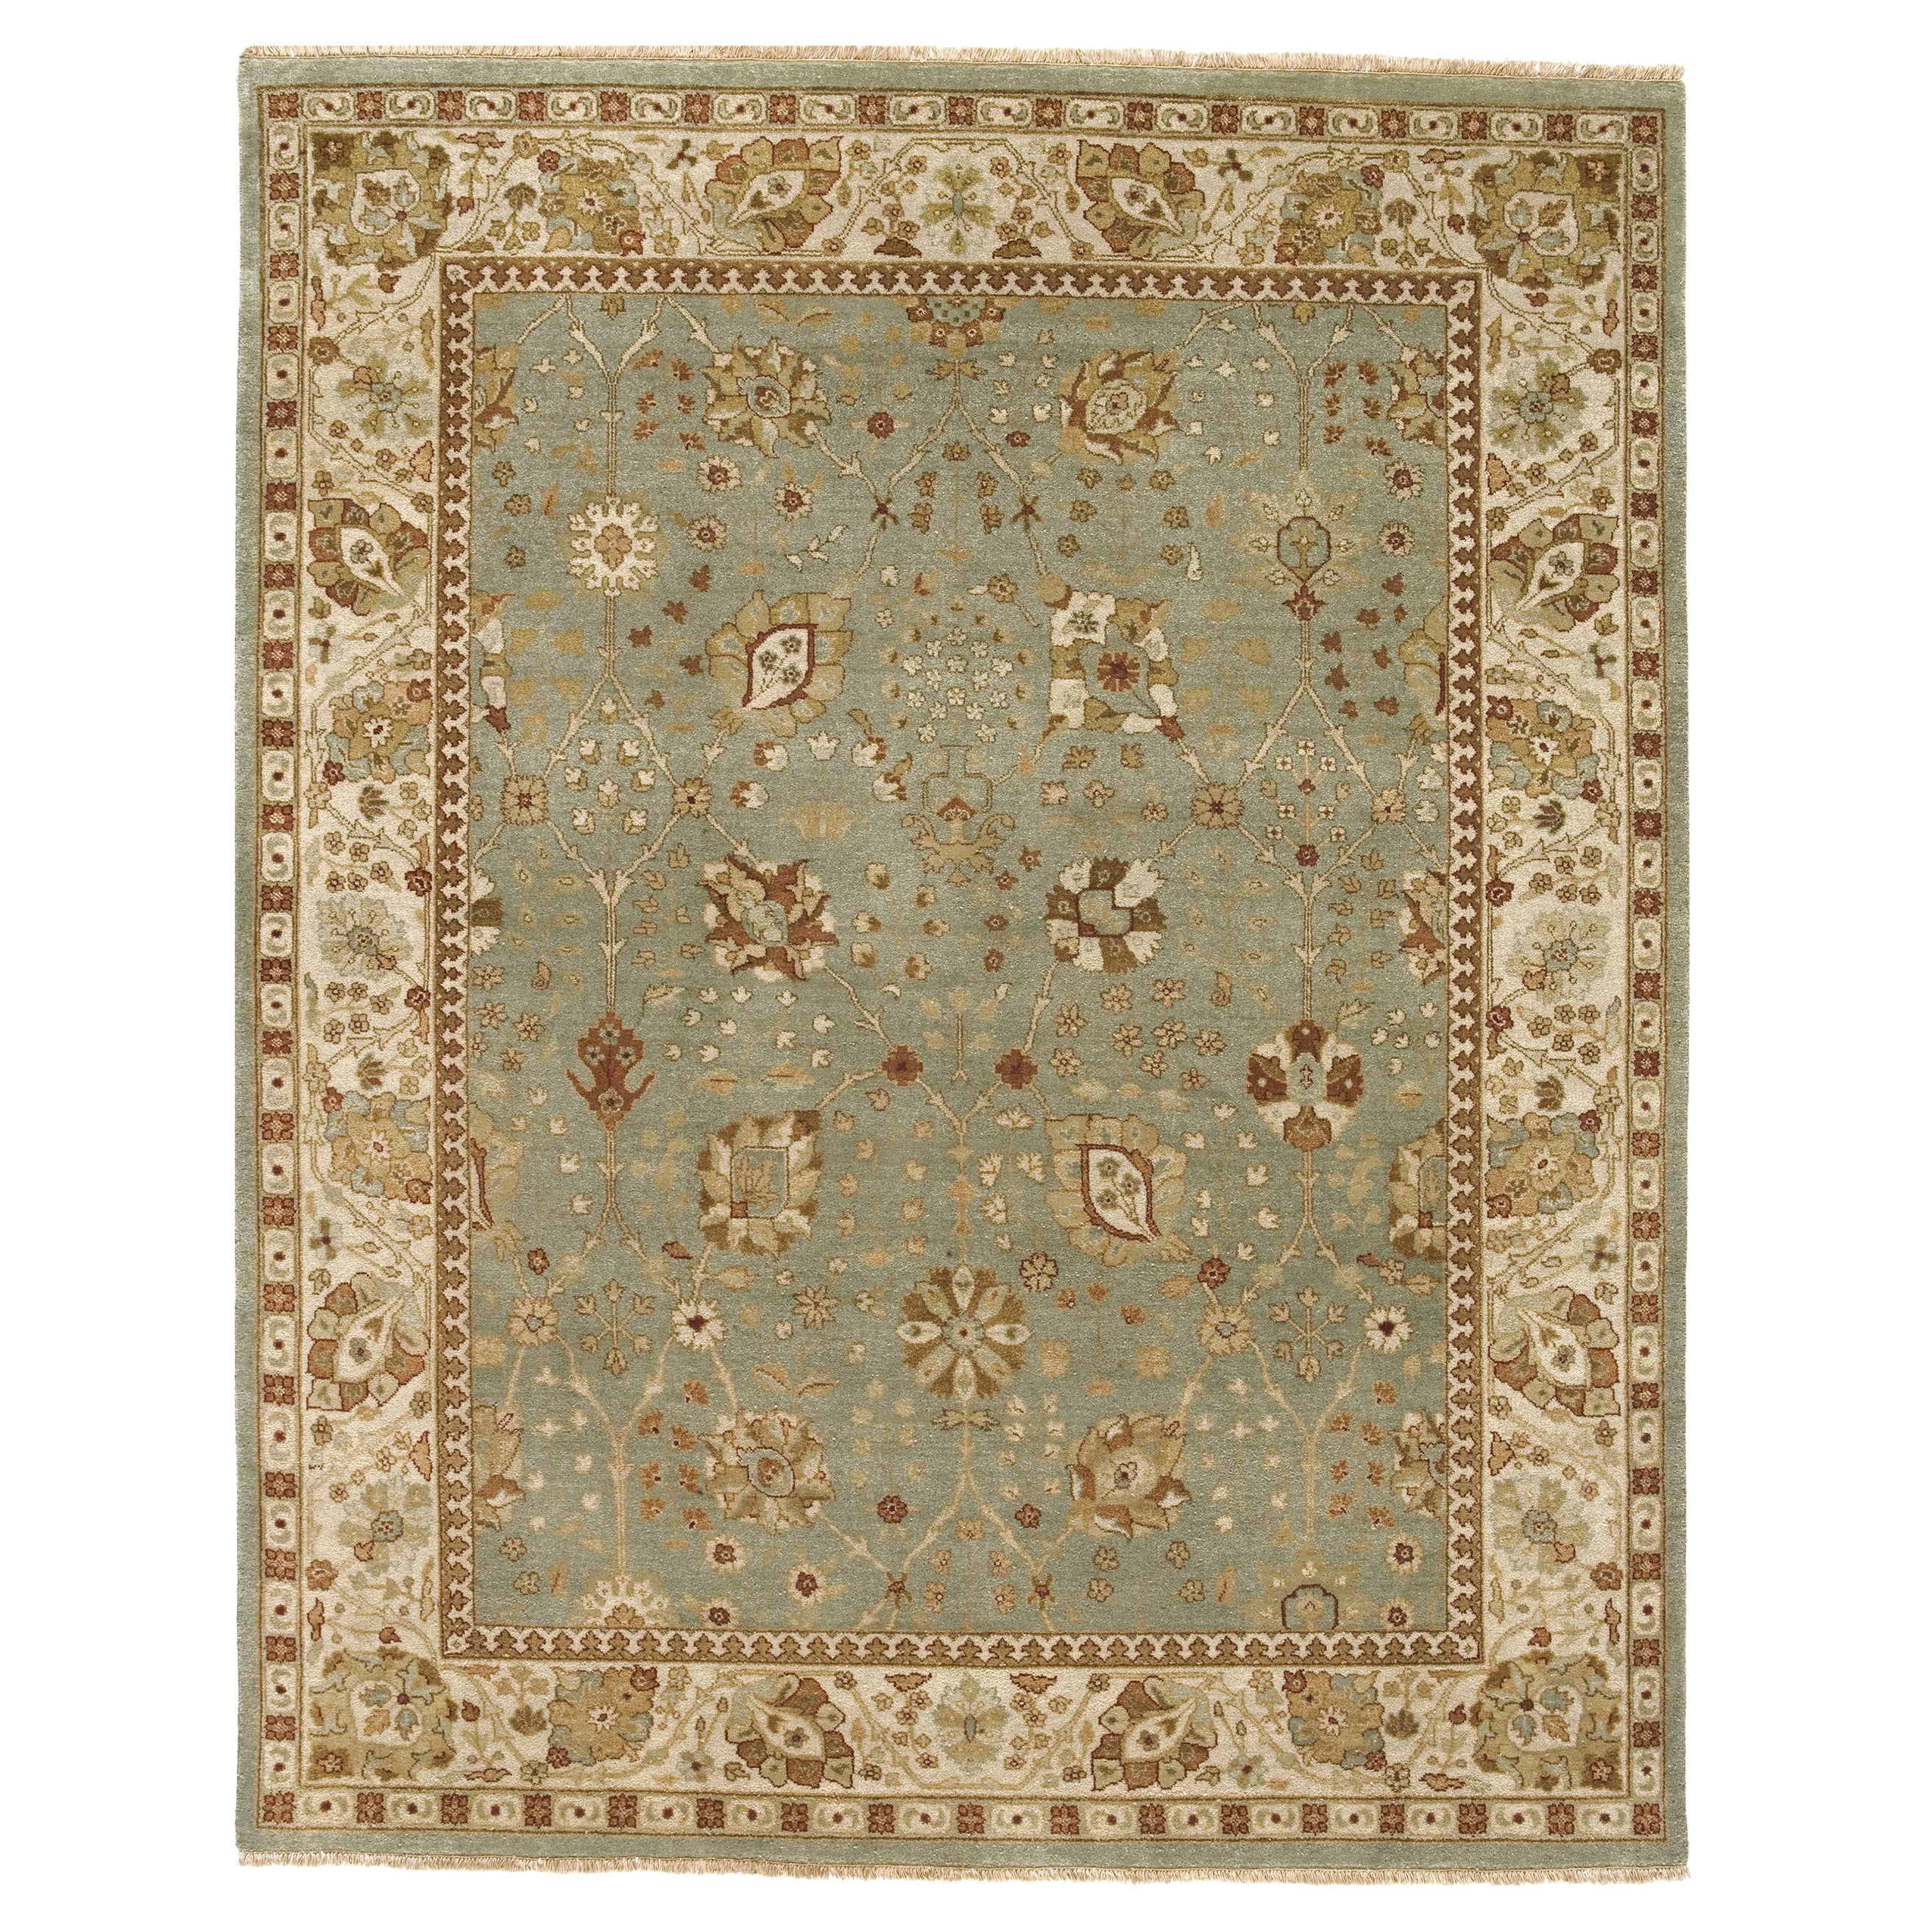 Luxury Traditional Hand-Knotted Tabriz Turquoise & Ivory 12x22 Rug